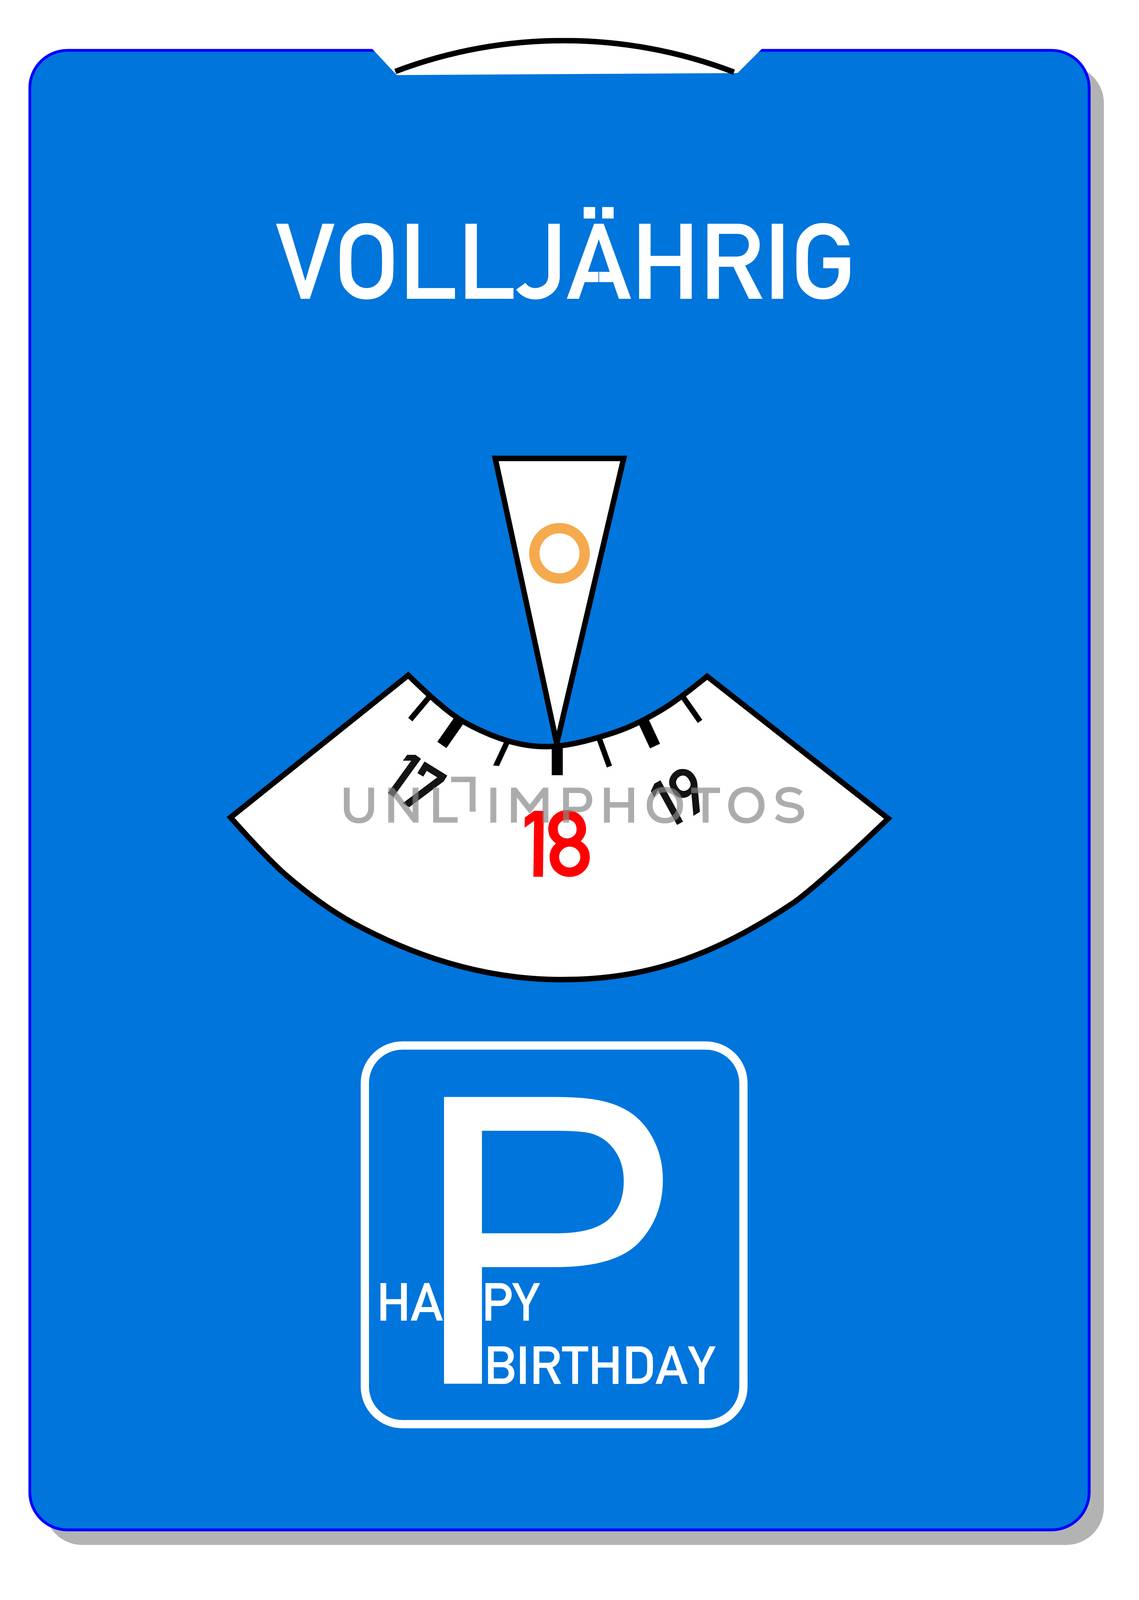 Birthday card for 18th birthday with the German word for of age (Volljaehrig)